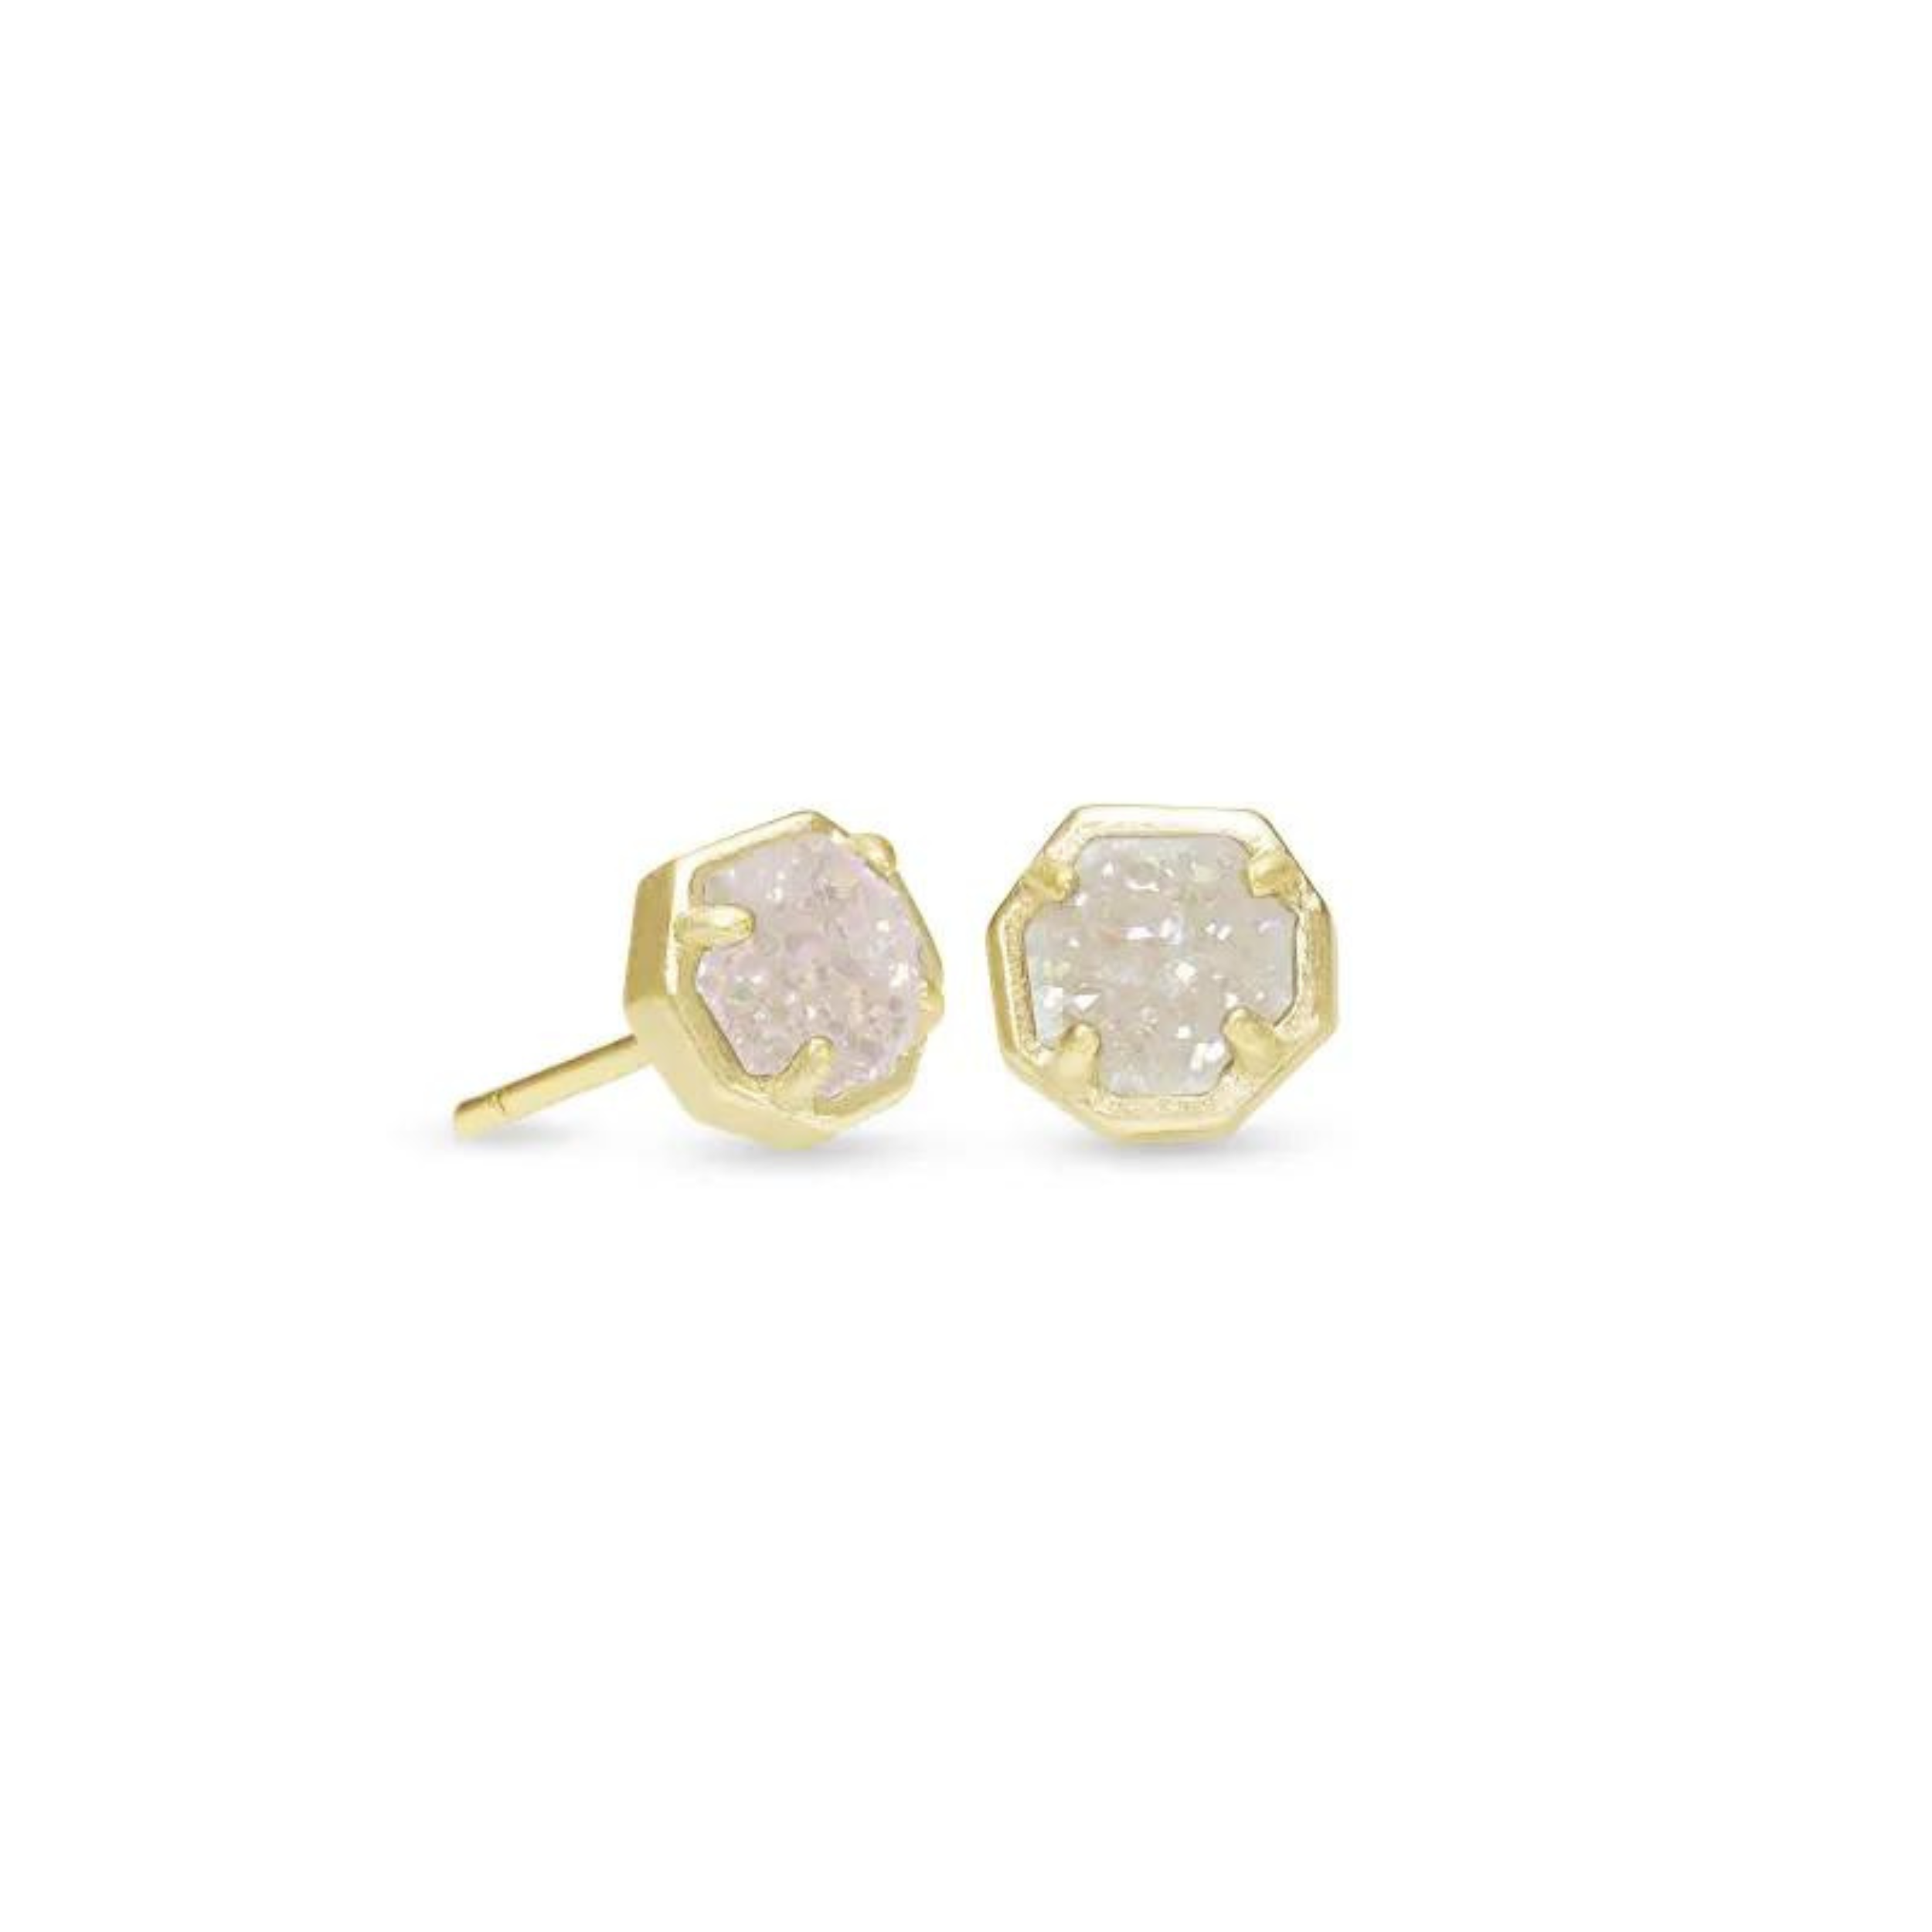 Gold stud earrings in a hexagon shape with iridesecnt drusy stones, pictured on a white background.